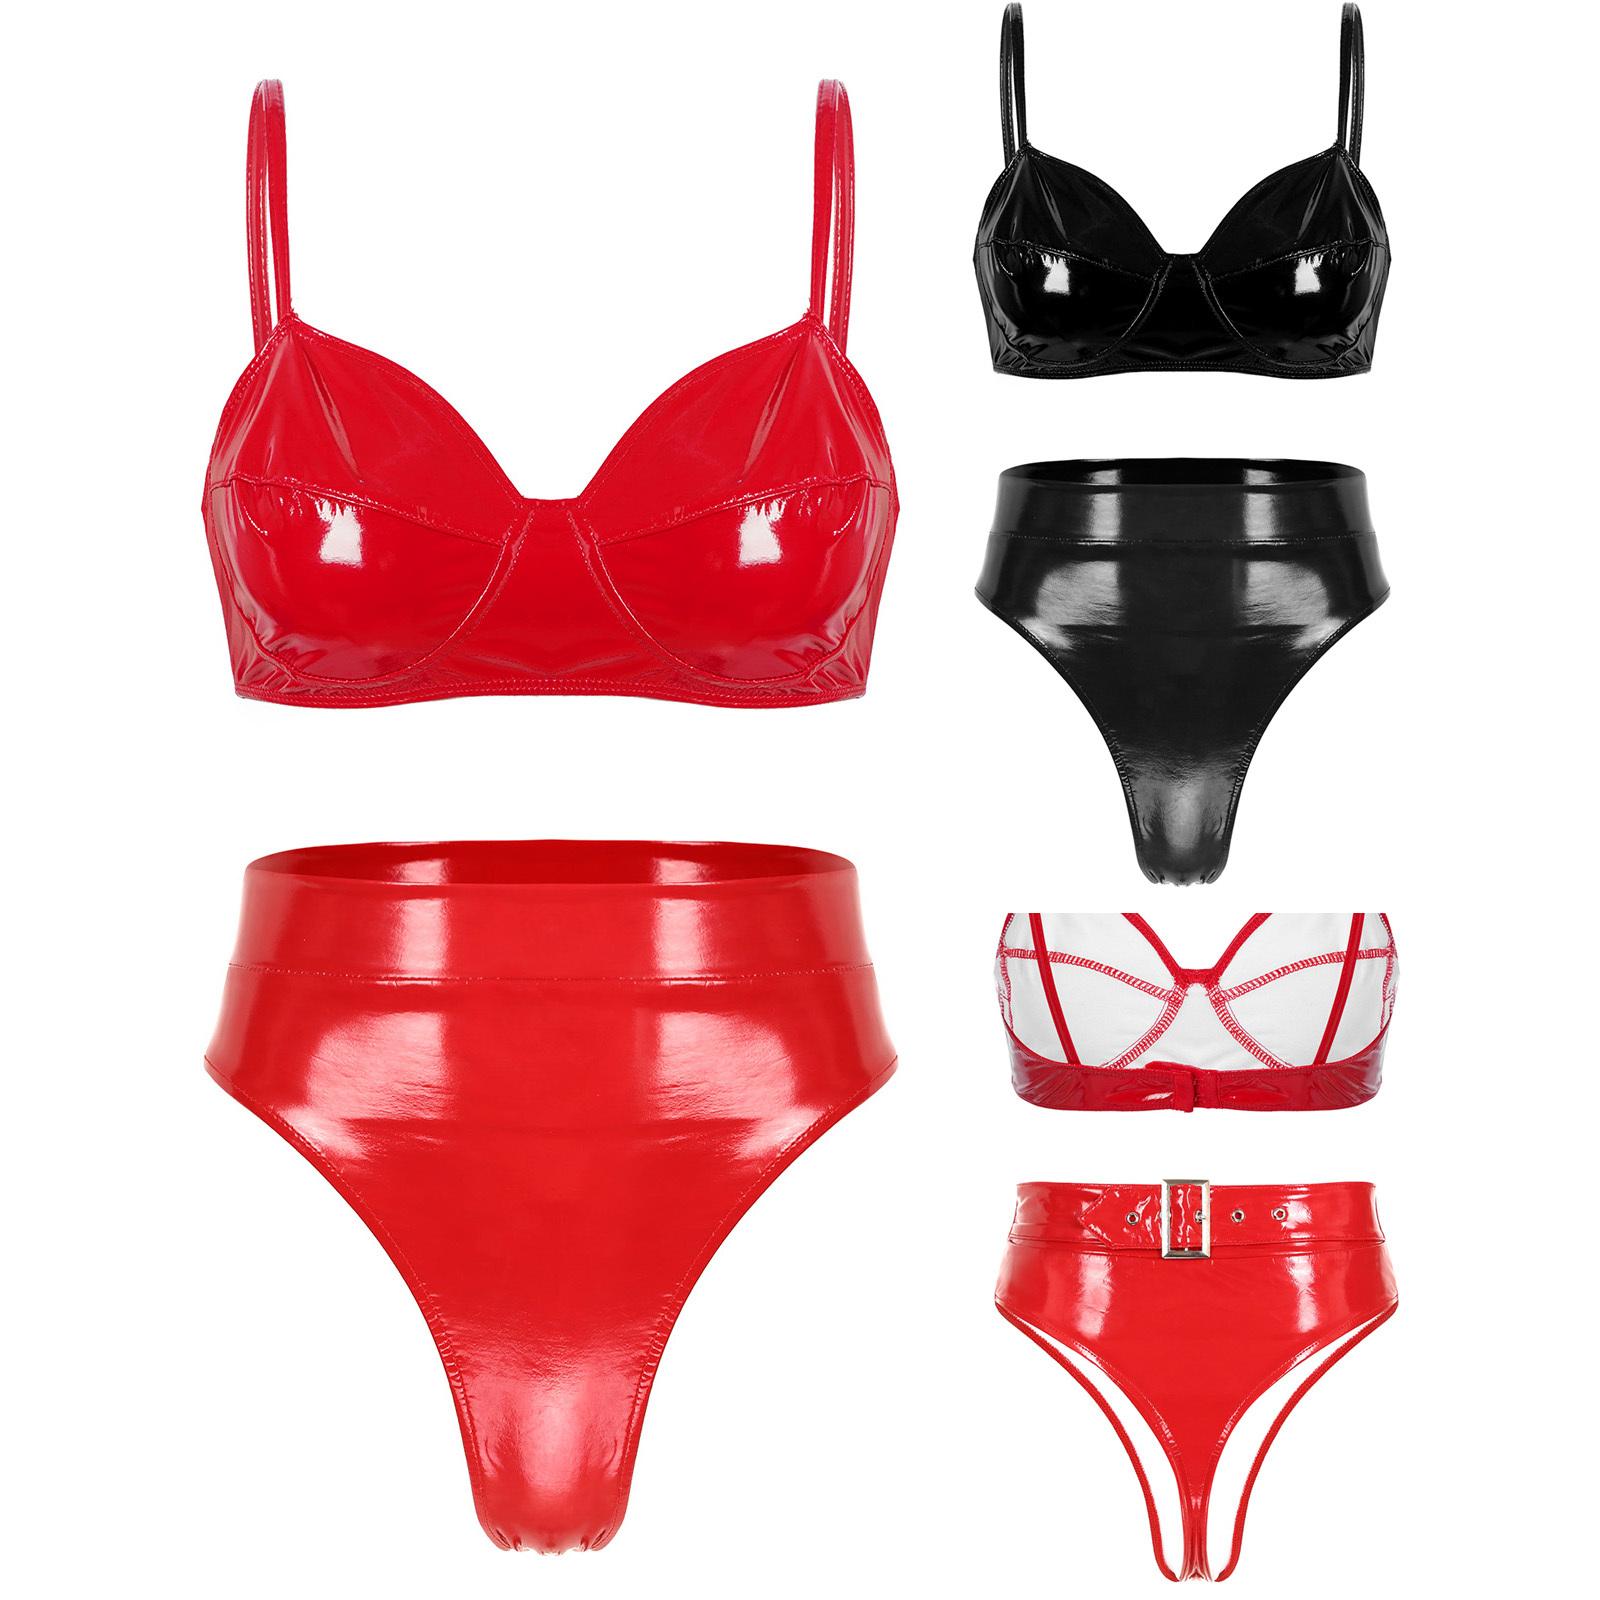 Fldy Women's Lingerie Set 2 Pieces Wet Look Patent Leather Wire-free No Padded Bra Top and Briefs Set Clubwear